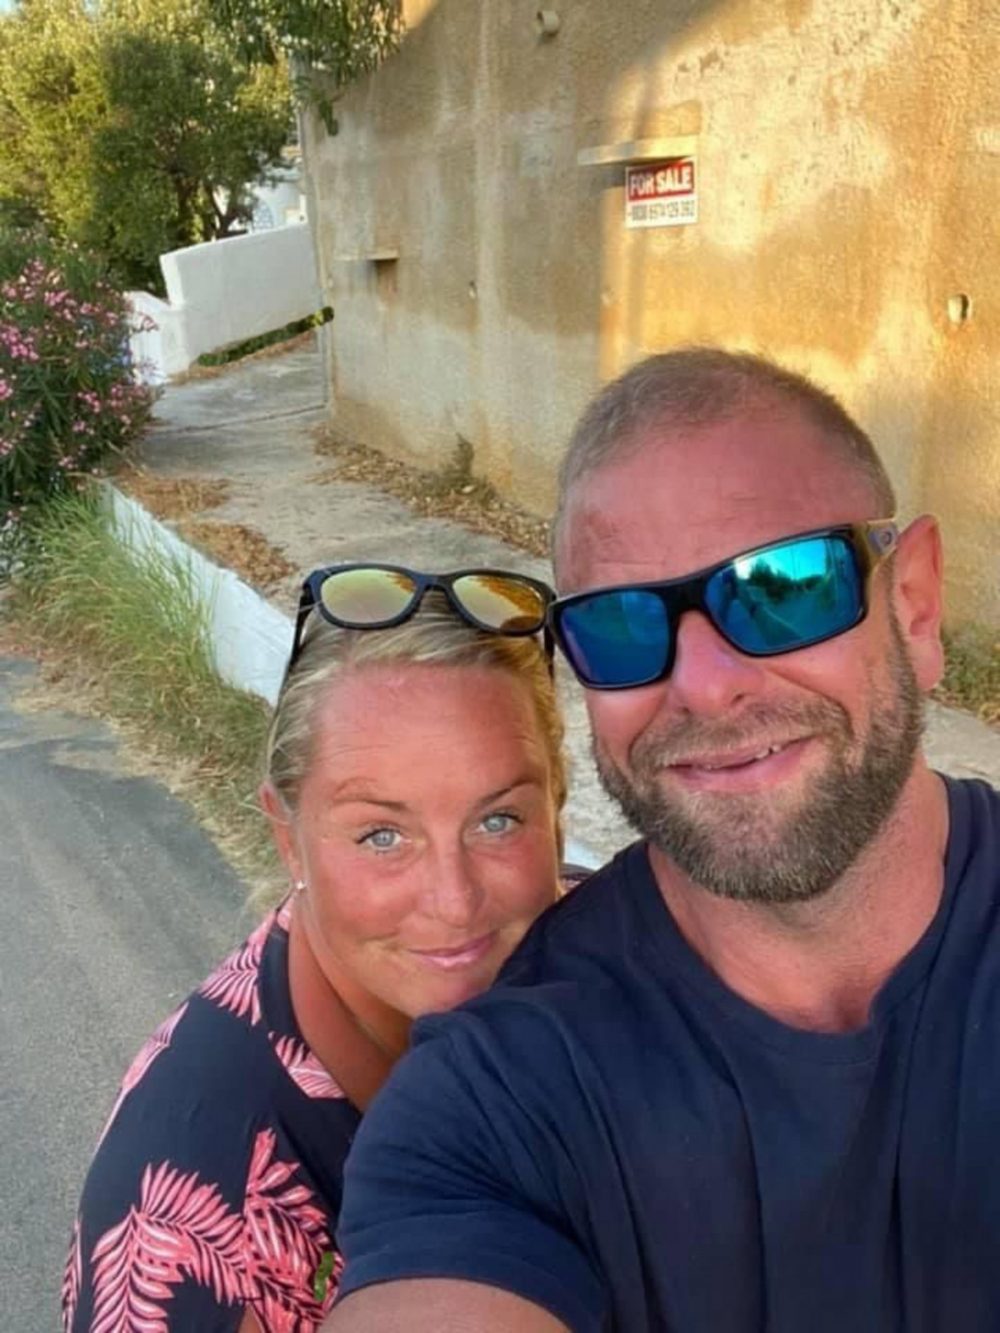 The happy couple on holiday - Viral Video News